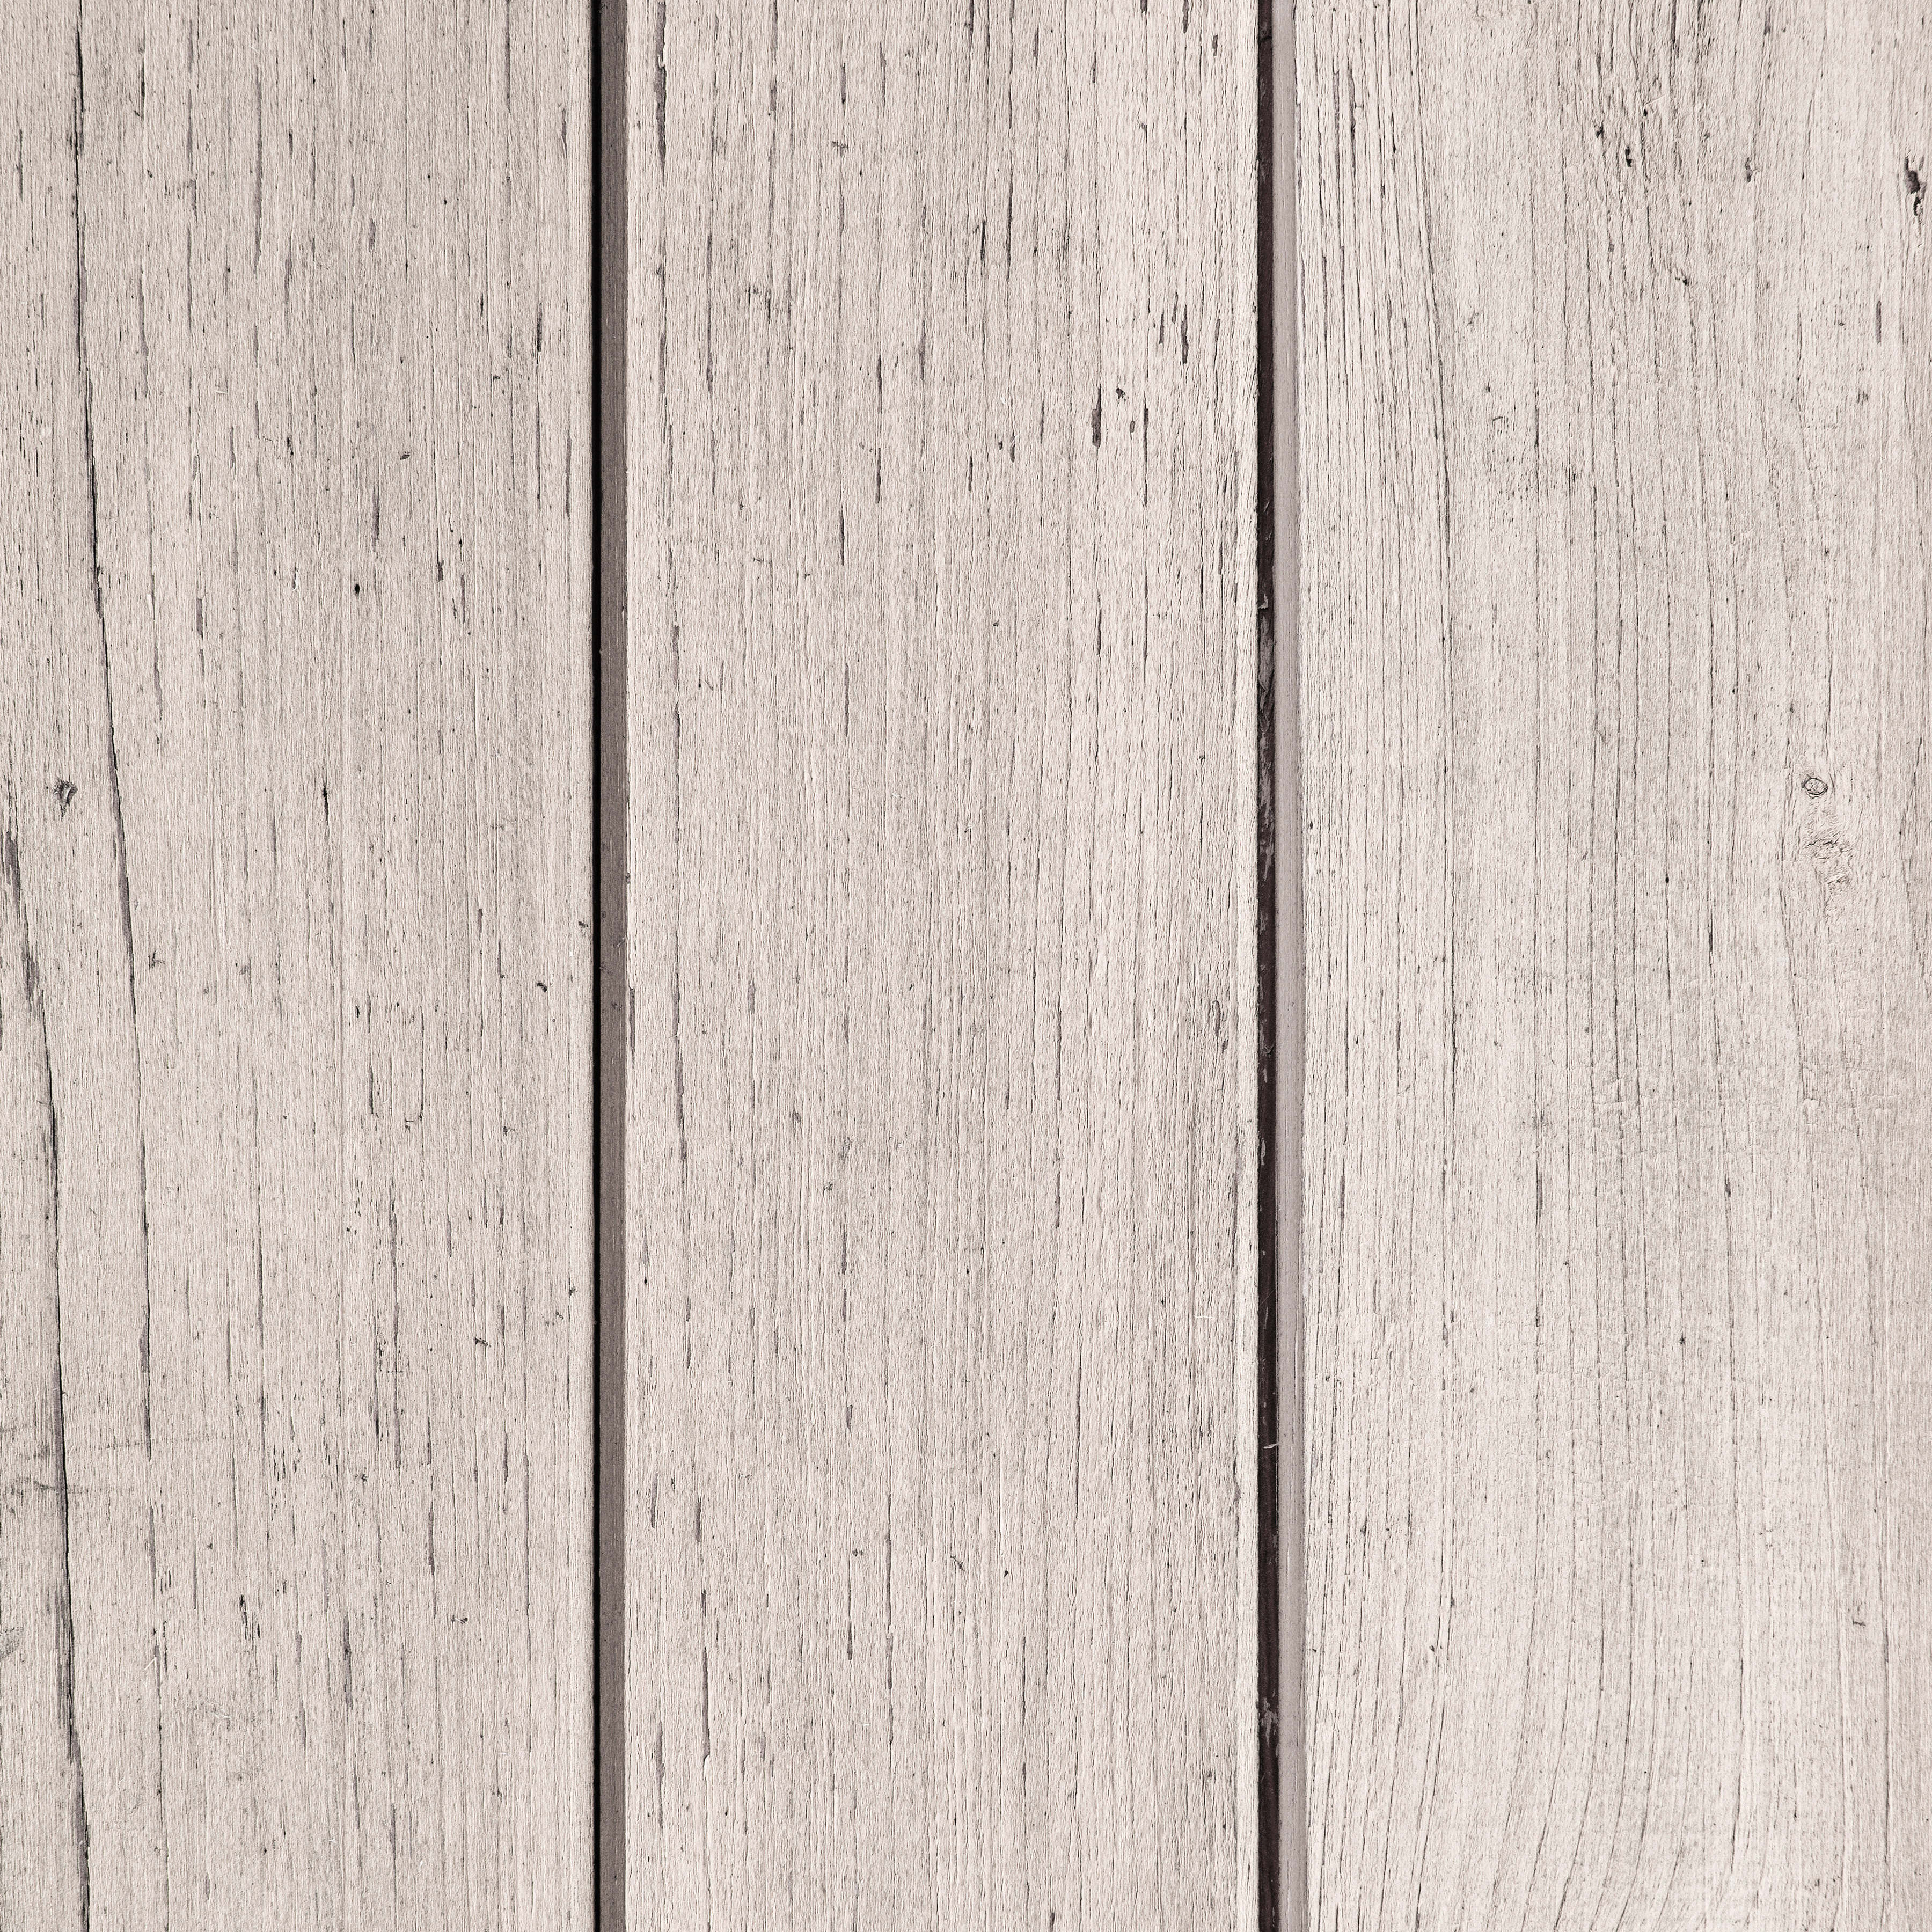 Texture of wood background closeup photo